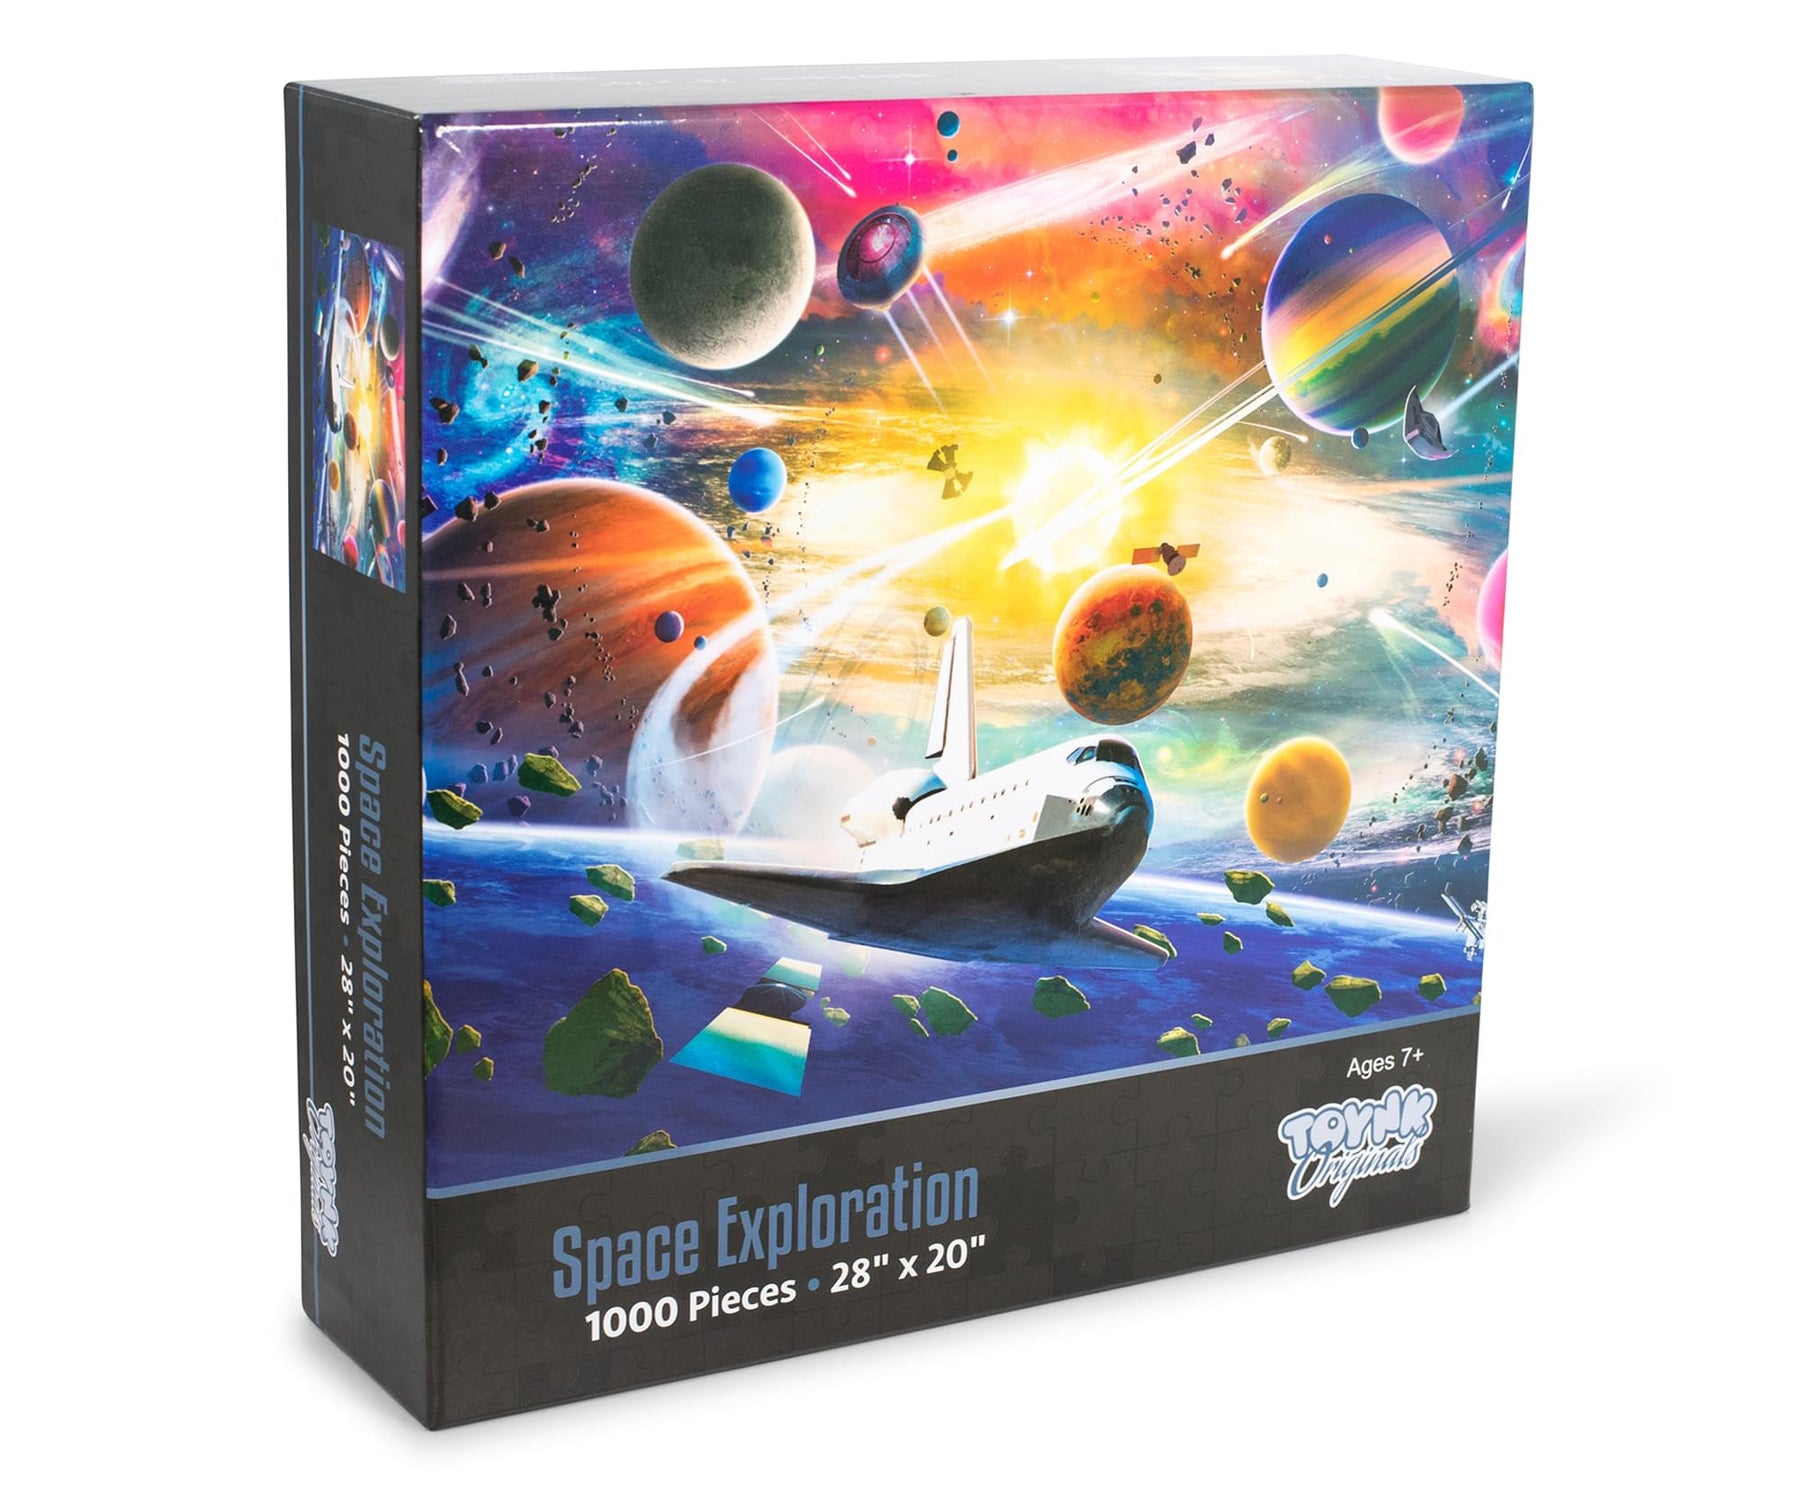 Space Exploration Galaxy Puzzle For Adults And Kids | 1000 Piece Jigsaw Puzzle